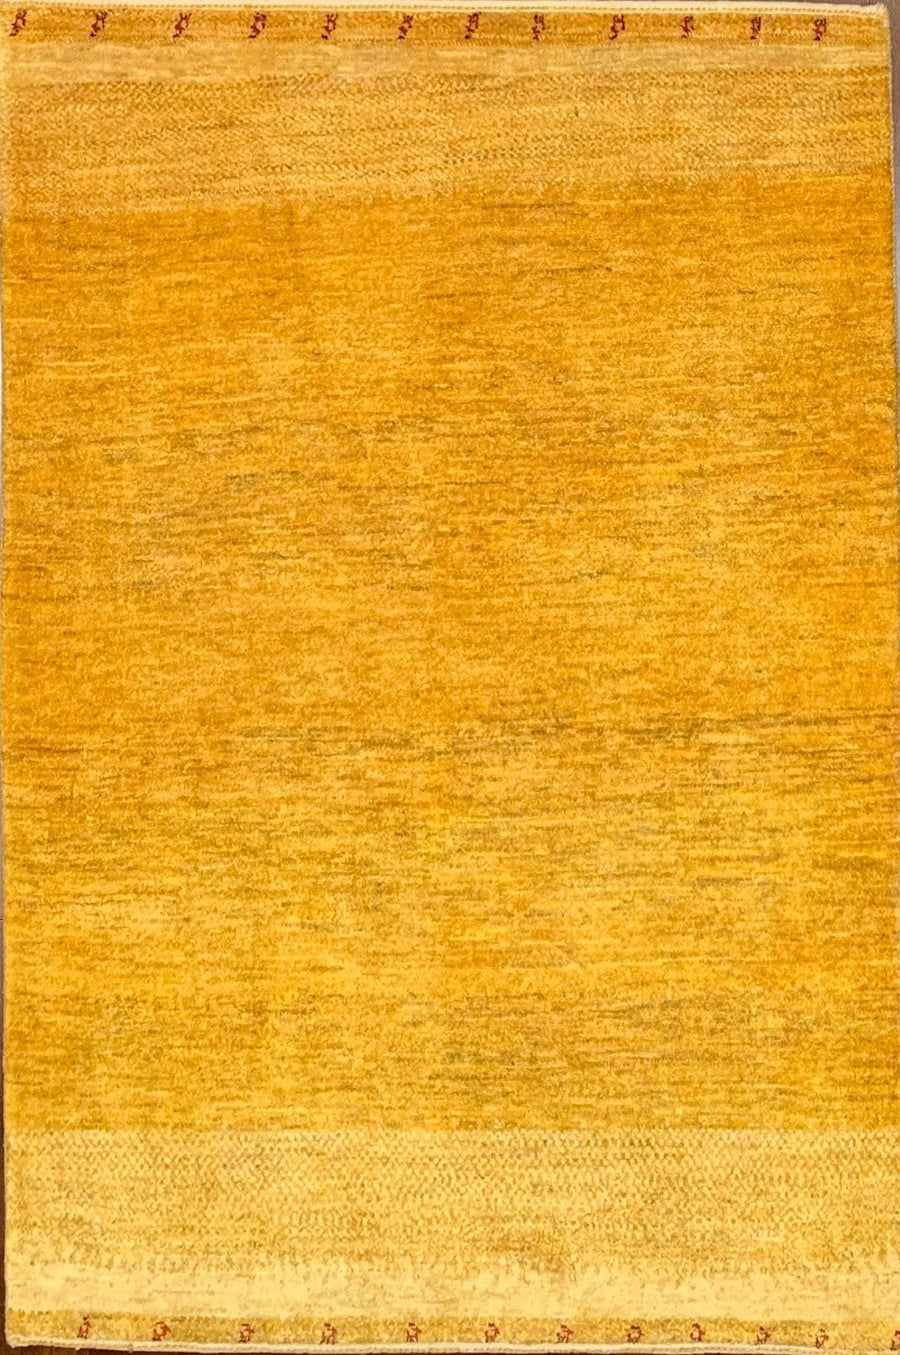 Golden Yellow Hand-knotted Gabbeh from Southern Iran.